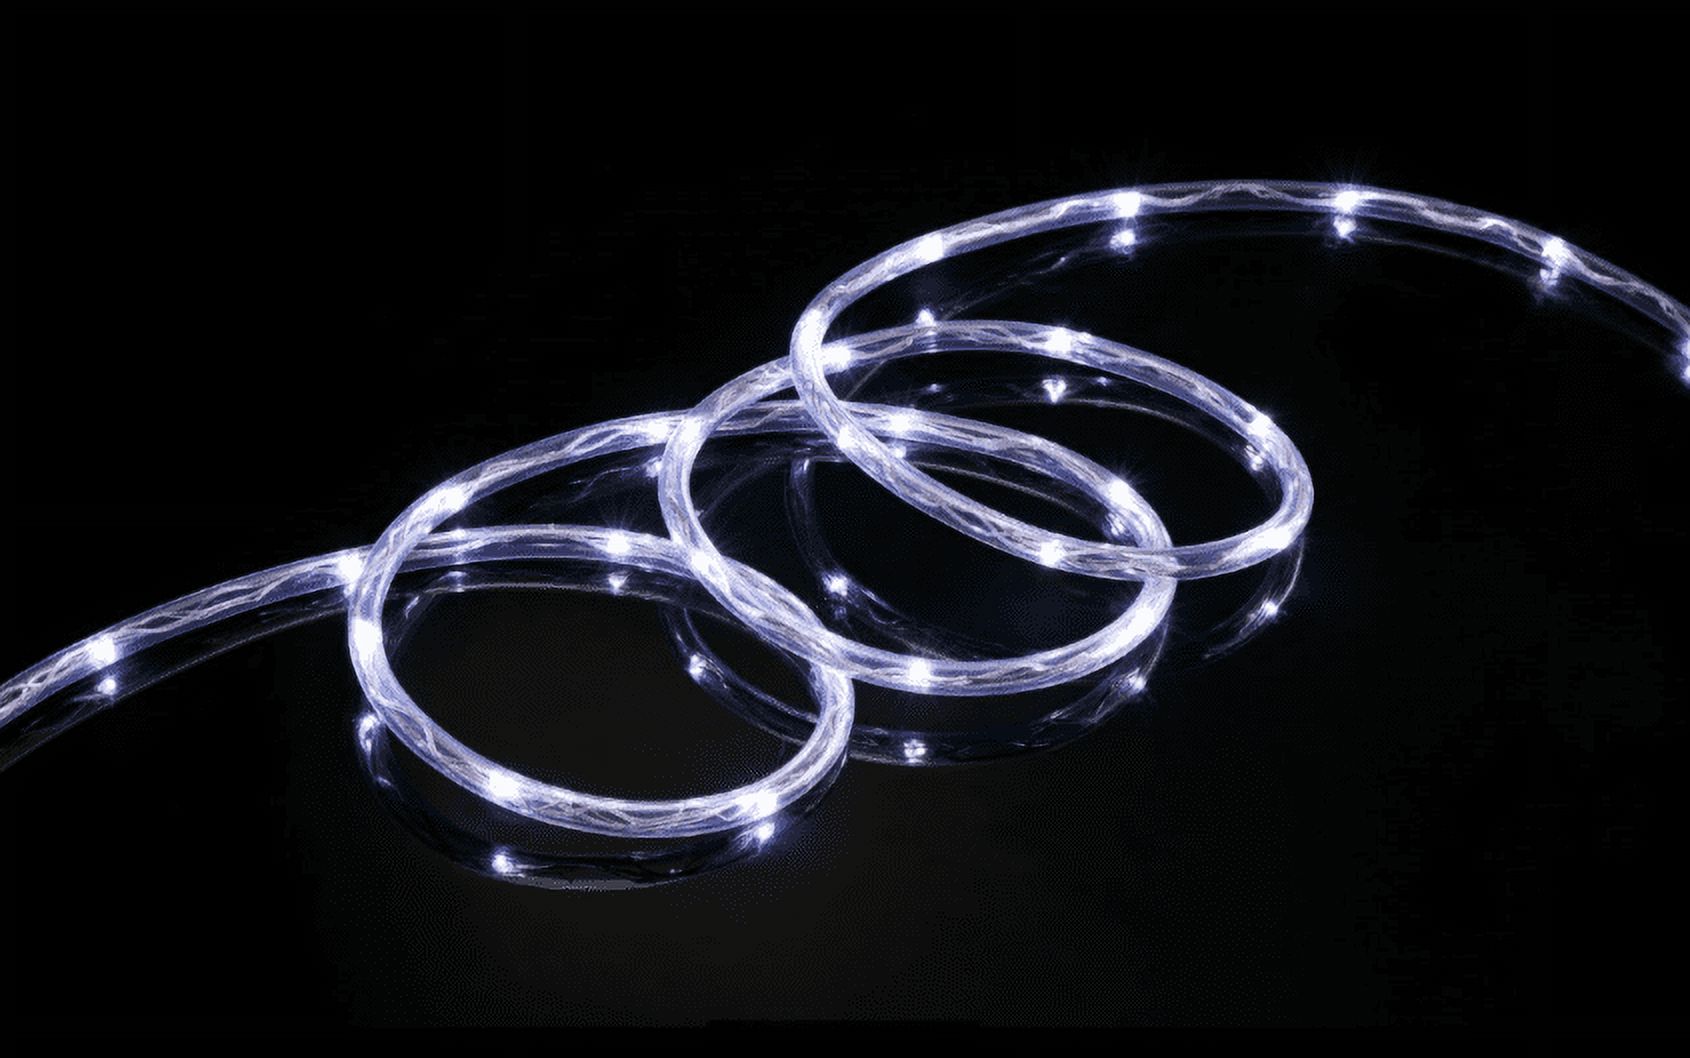 Meilo 16 FT LED Mini Rope Light Low Profile 1/4 diameter Daylight, Connectable, Waterproof, Indoor/Outdoor Use, Backyards, 360&deg; Directional Shine, Decoration, Party, Landscape, Weddings, RV - image 1 of 6